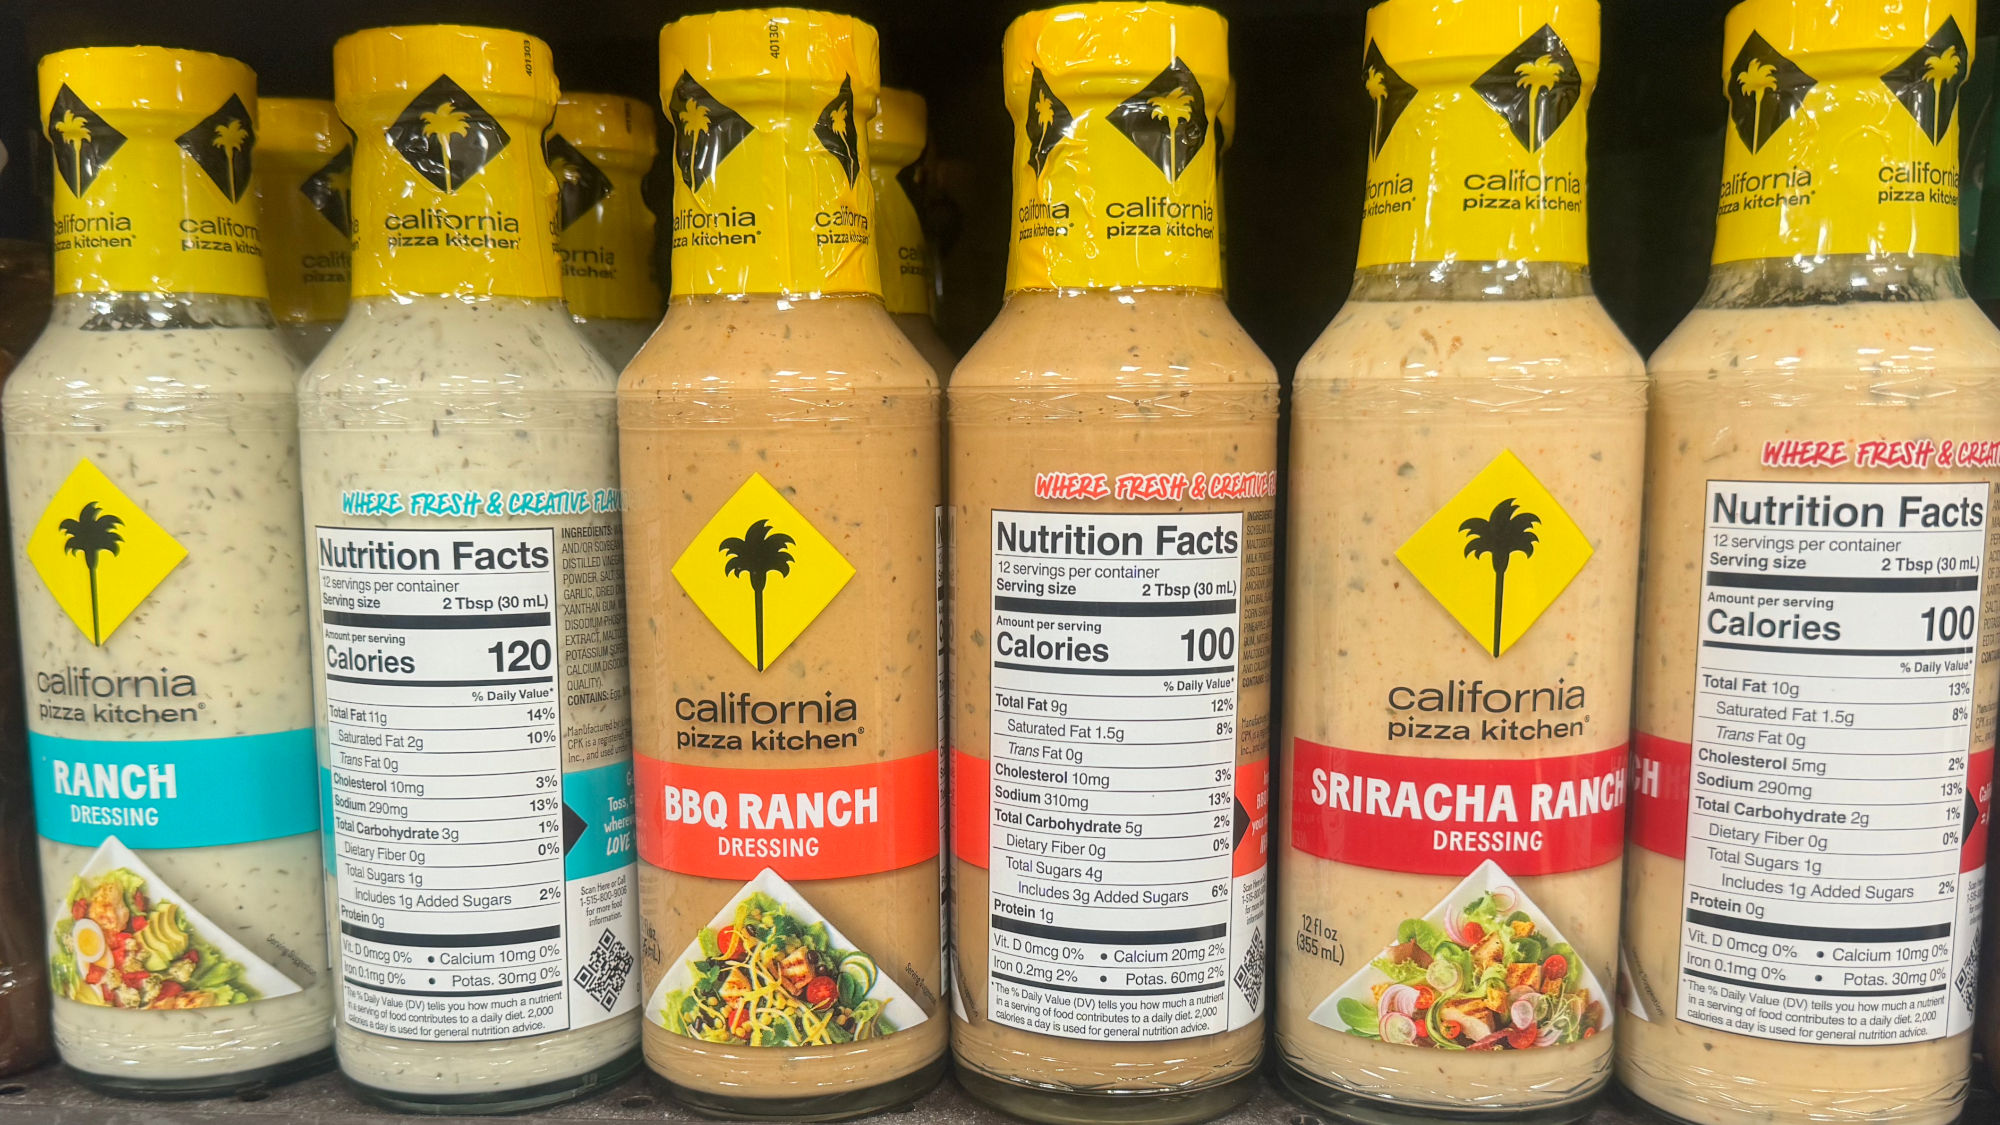 CPK Grocery Store Salad Dressing